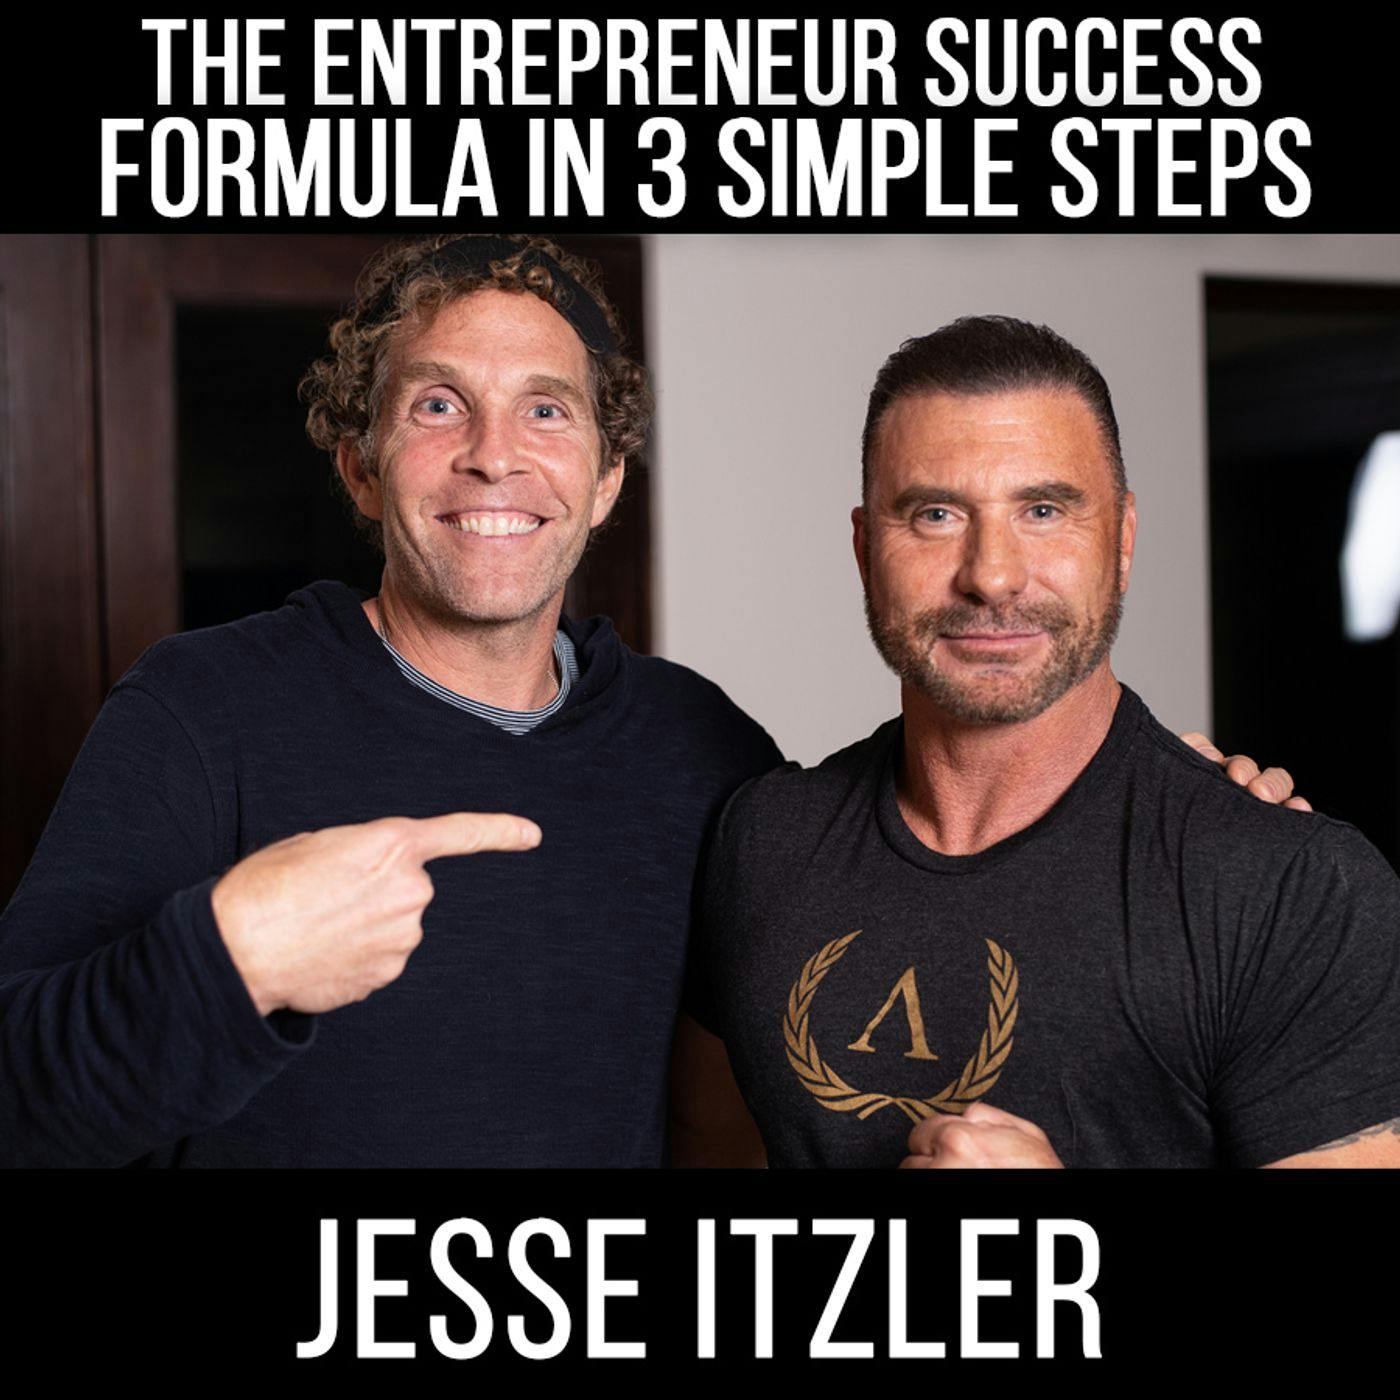 Jesse Itzler Shares What it Means to be a “Spiritual Billionaire